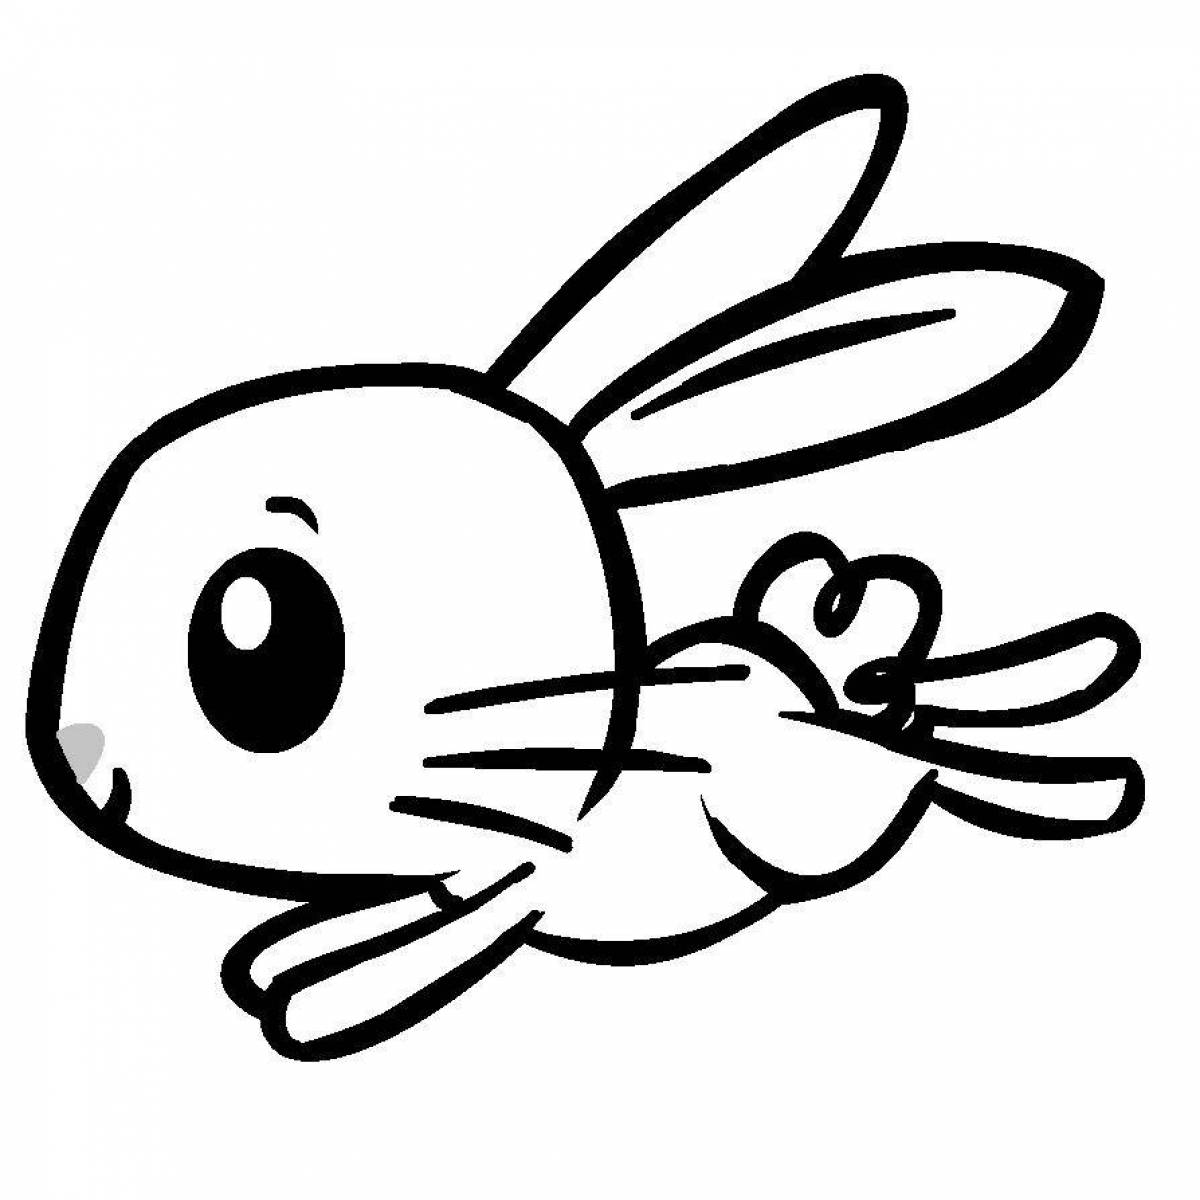 Adorable and cute bunny coloring book